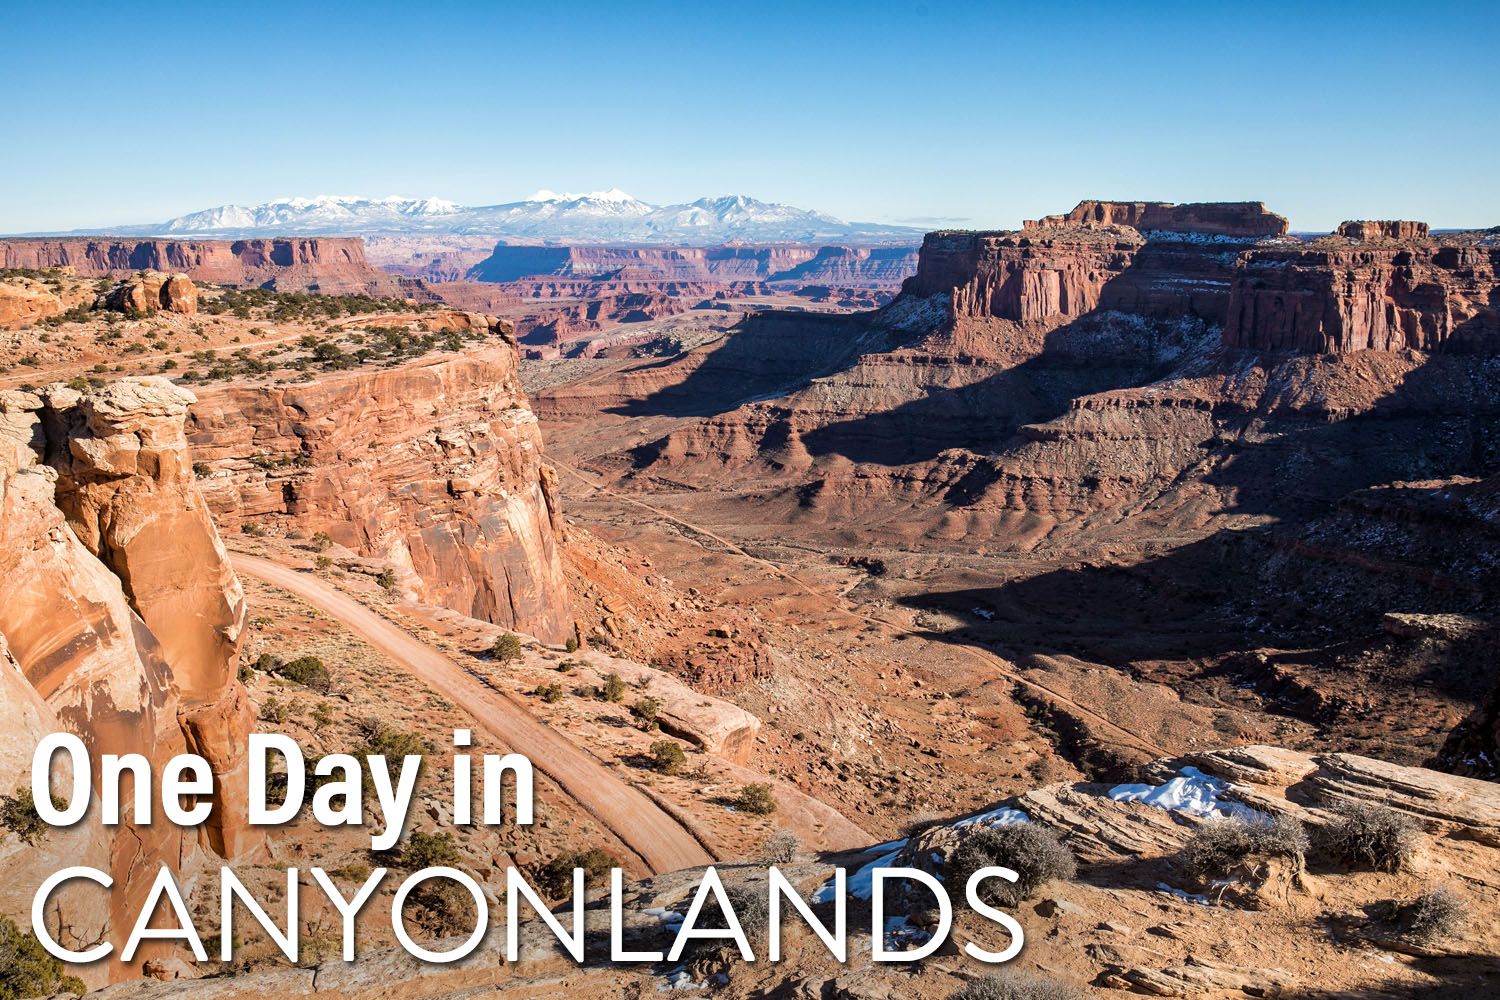 One Day in Canyonlands